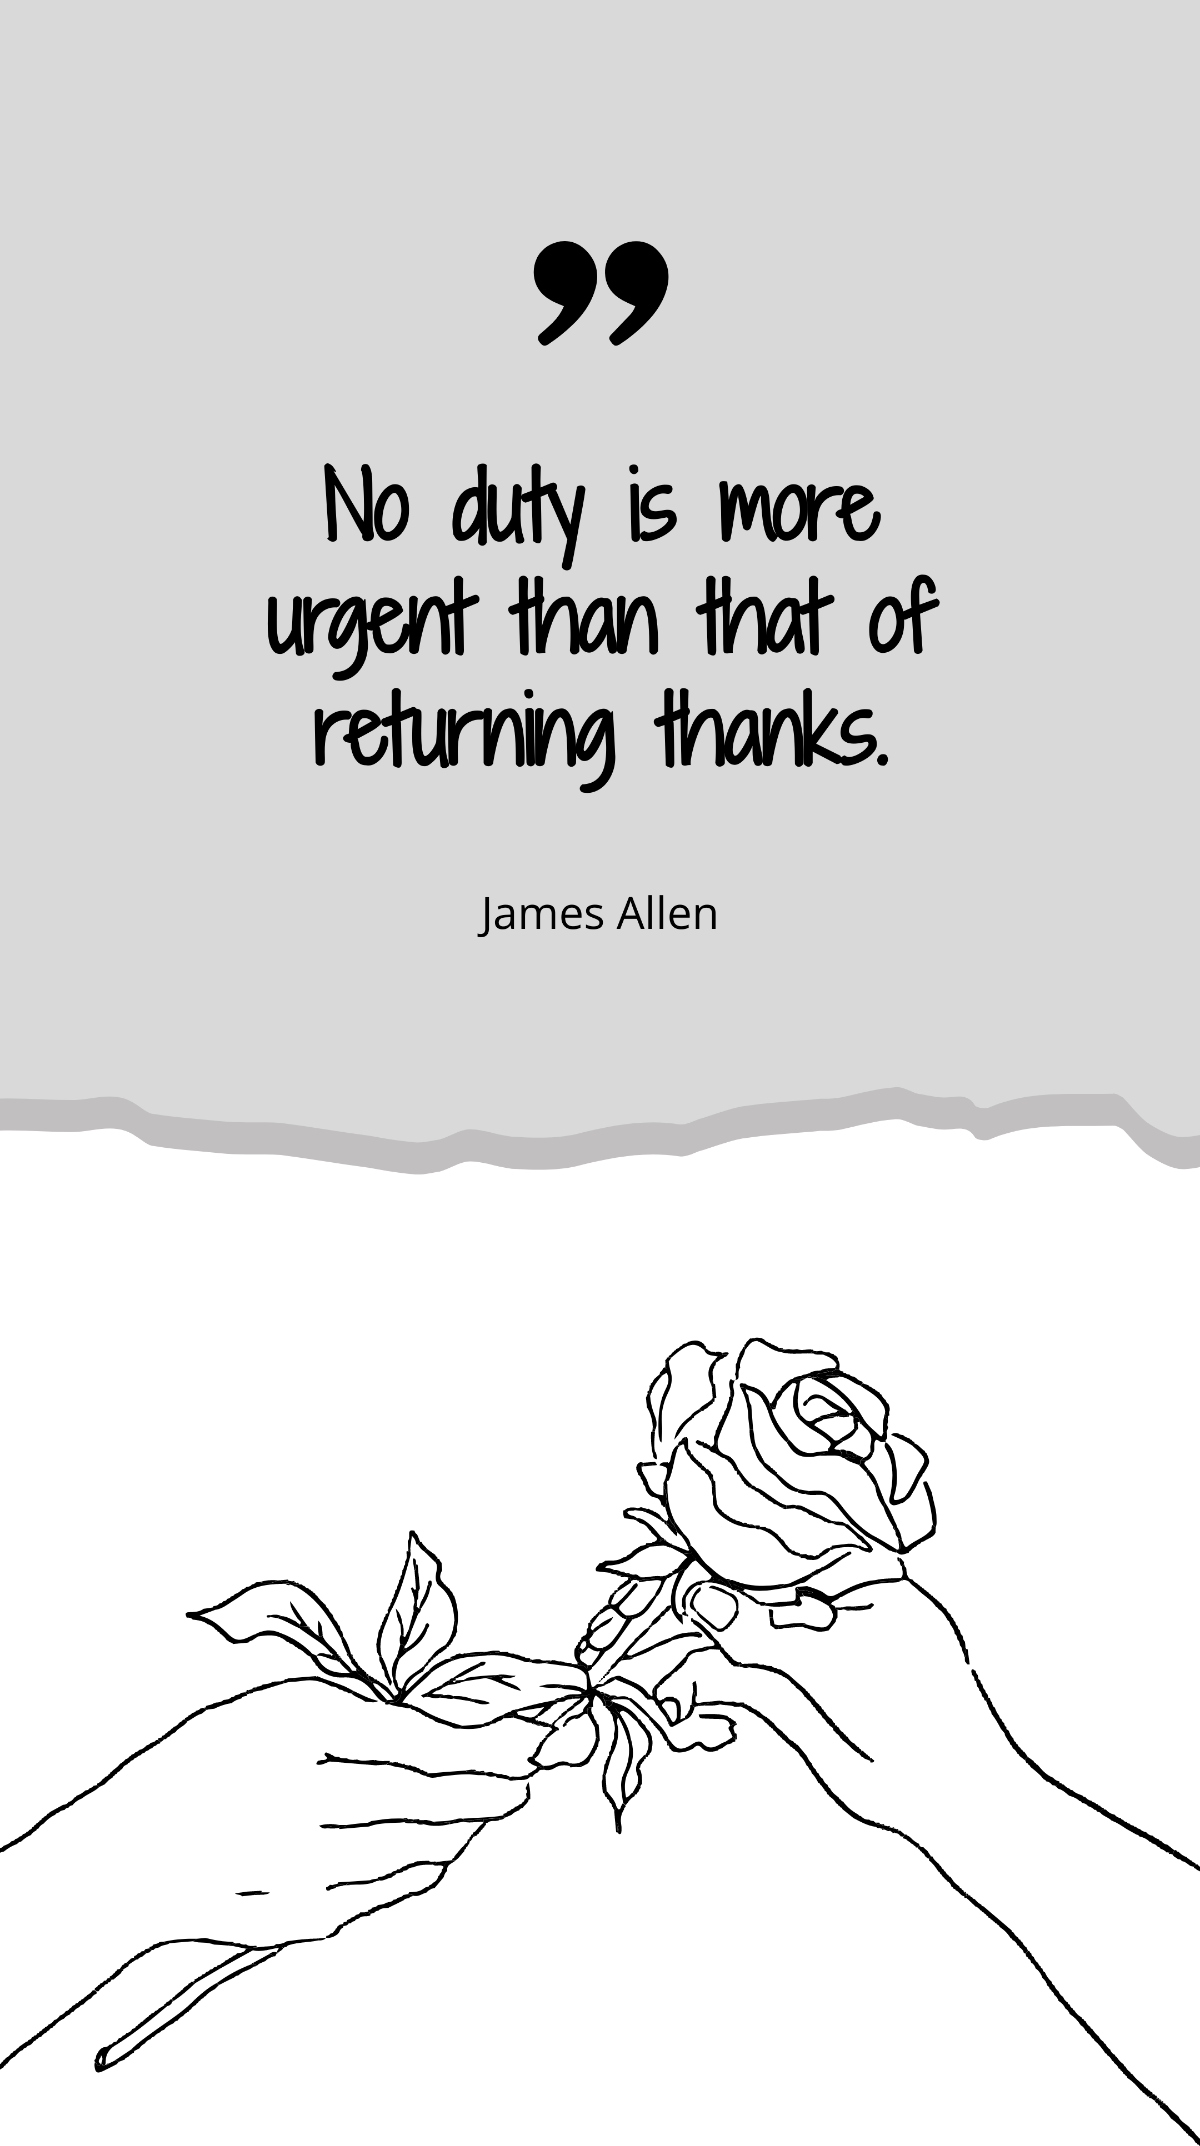 James Allen - "No duty is more urgent than that of returning thanks.”